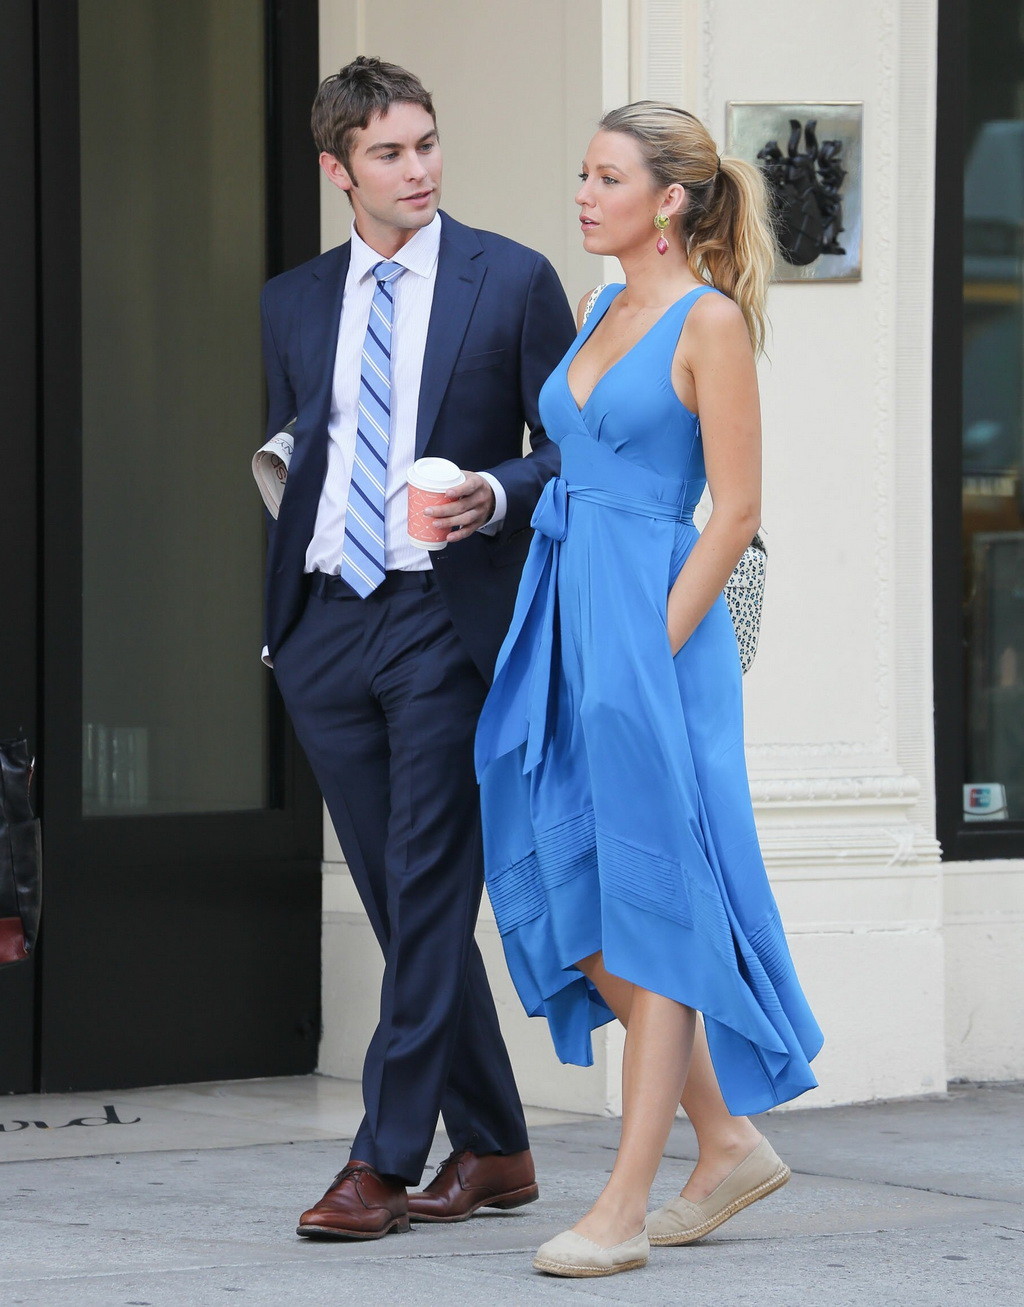 Blake lively showing big cleavage wearing blue maxi dress at the set of gossip g
 #75256951